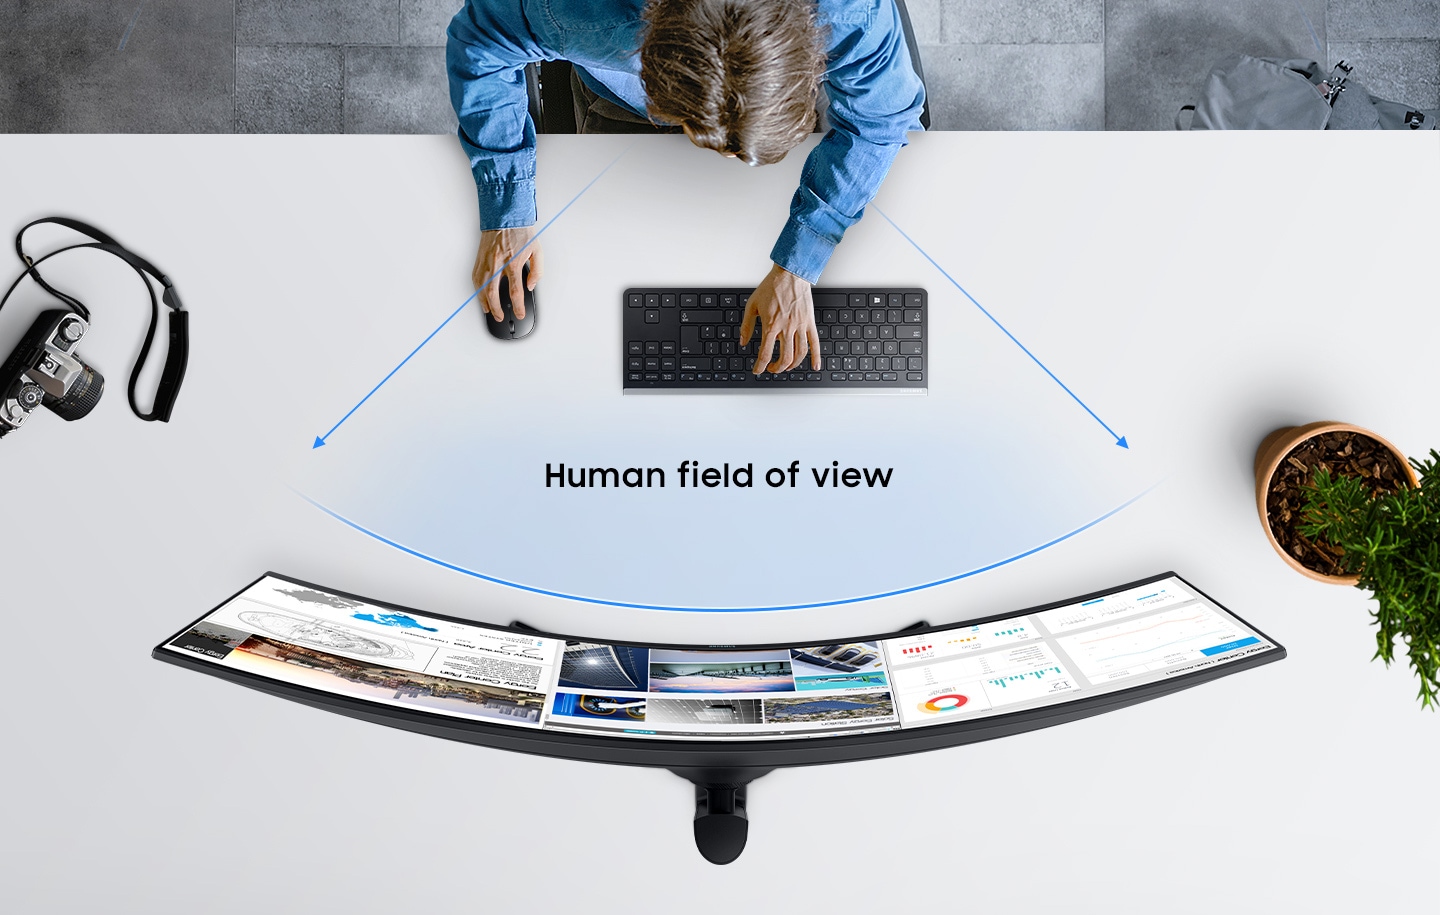 Birdseye view of S9 with an individual sitting in front of the monitor using a keyboard and mouse. Two gray beams of light are overlaid with the words †Eye Fatigue Zone' while a blue curve shows the human field of view to demonstrate how the curved monitor matches the human eyesight. Also, on the desk either side of the individual using the monitor is a black digital camera and potted green plant.